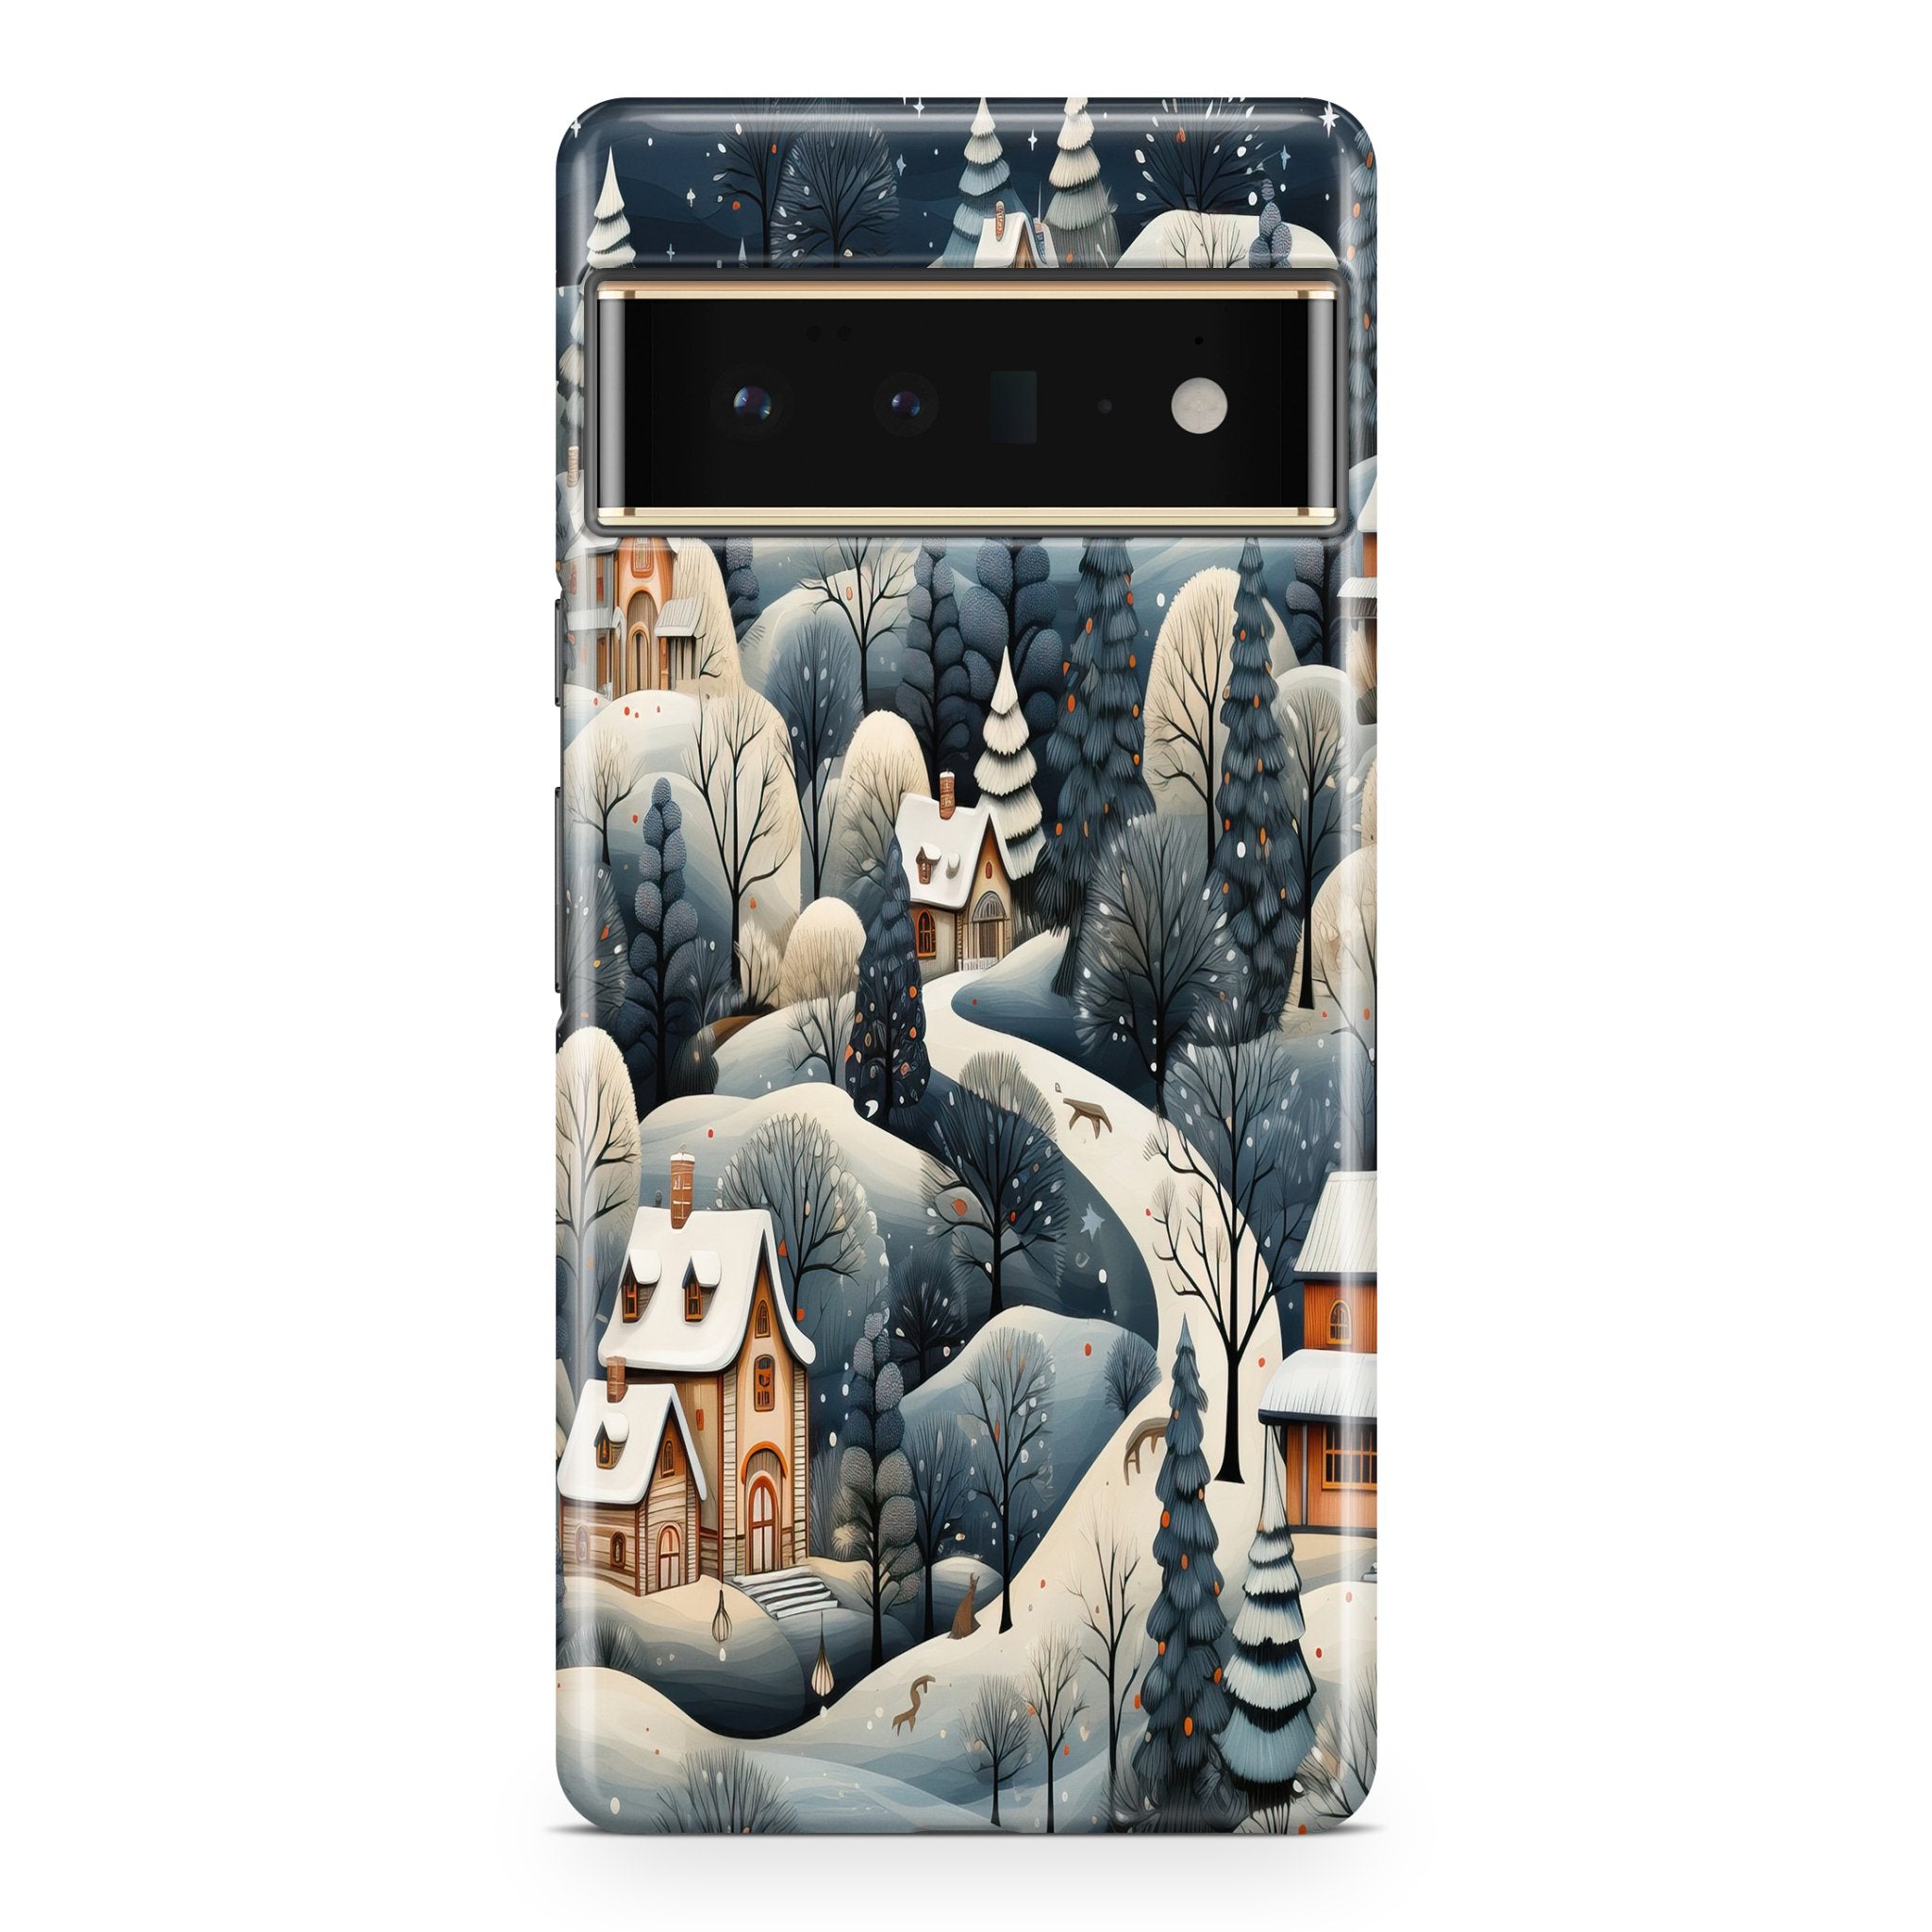 Winter Solstice - Google phone case designs by CaseSwagger